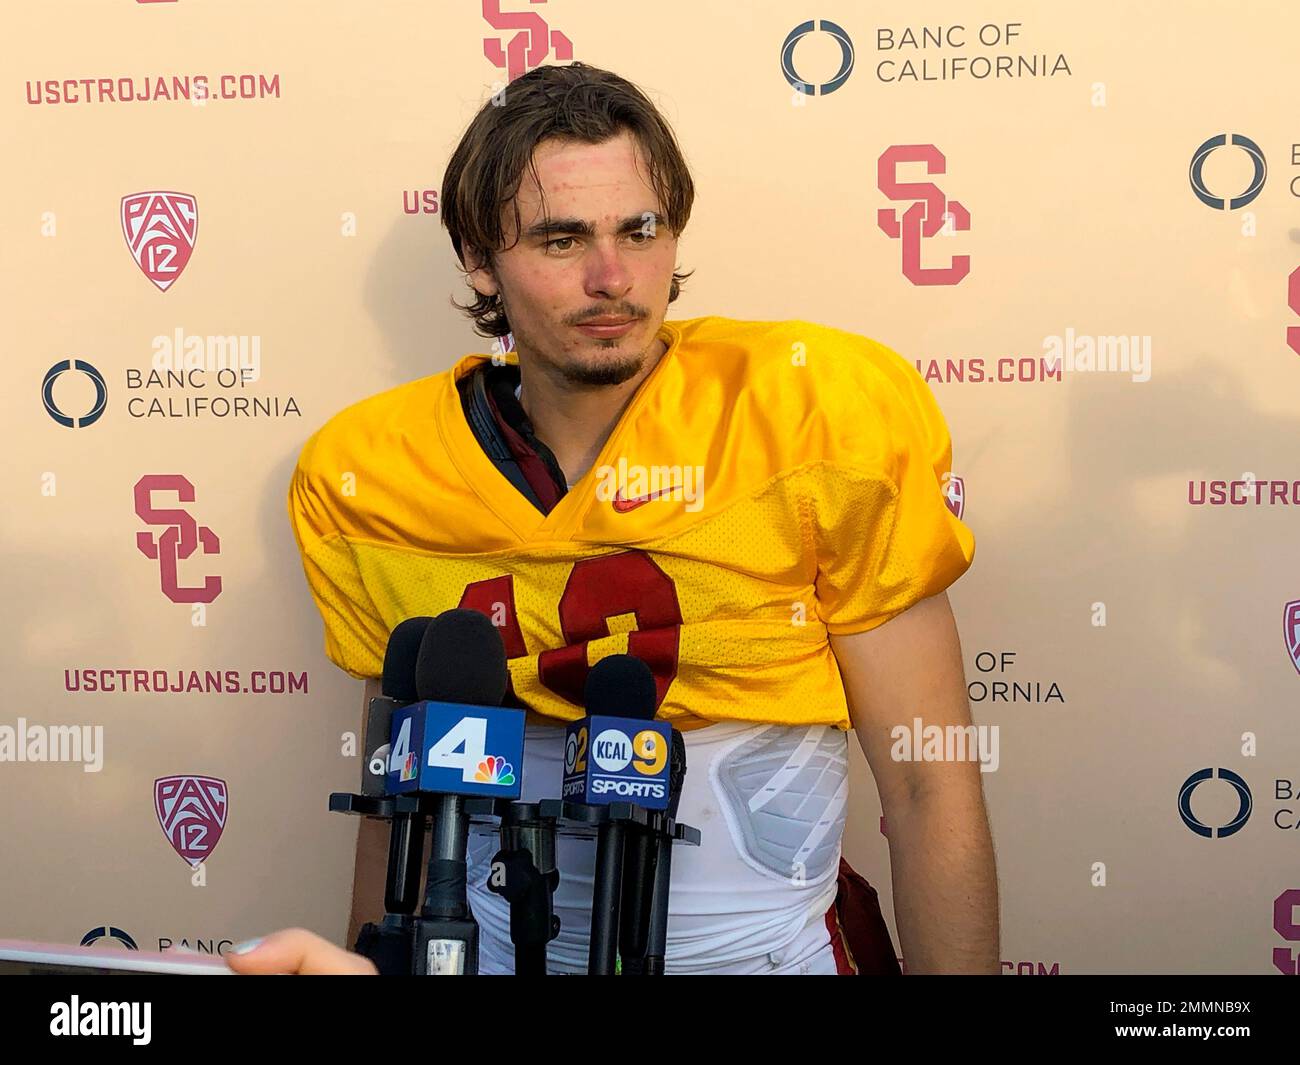 Southern California quarterback J.T. Daniels listens to reporters following his first NCAA college football practice after winning the Trojans' starting job, Tuesday, Aug. 28, 2018, in Los Angeles. The 18-year-old Daniels will be the first true freshman to start at quarterback for USC's powerhouse program since 2009. (AP Photo/Greg Beacham) Foto Stock